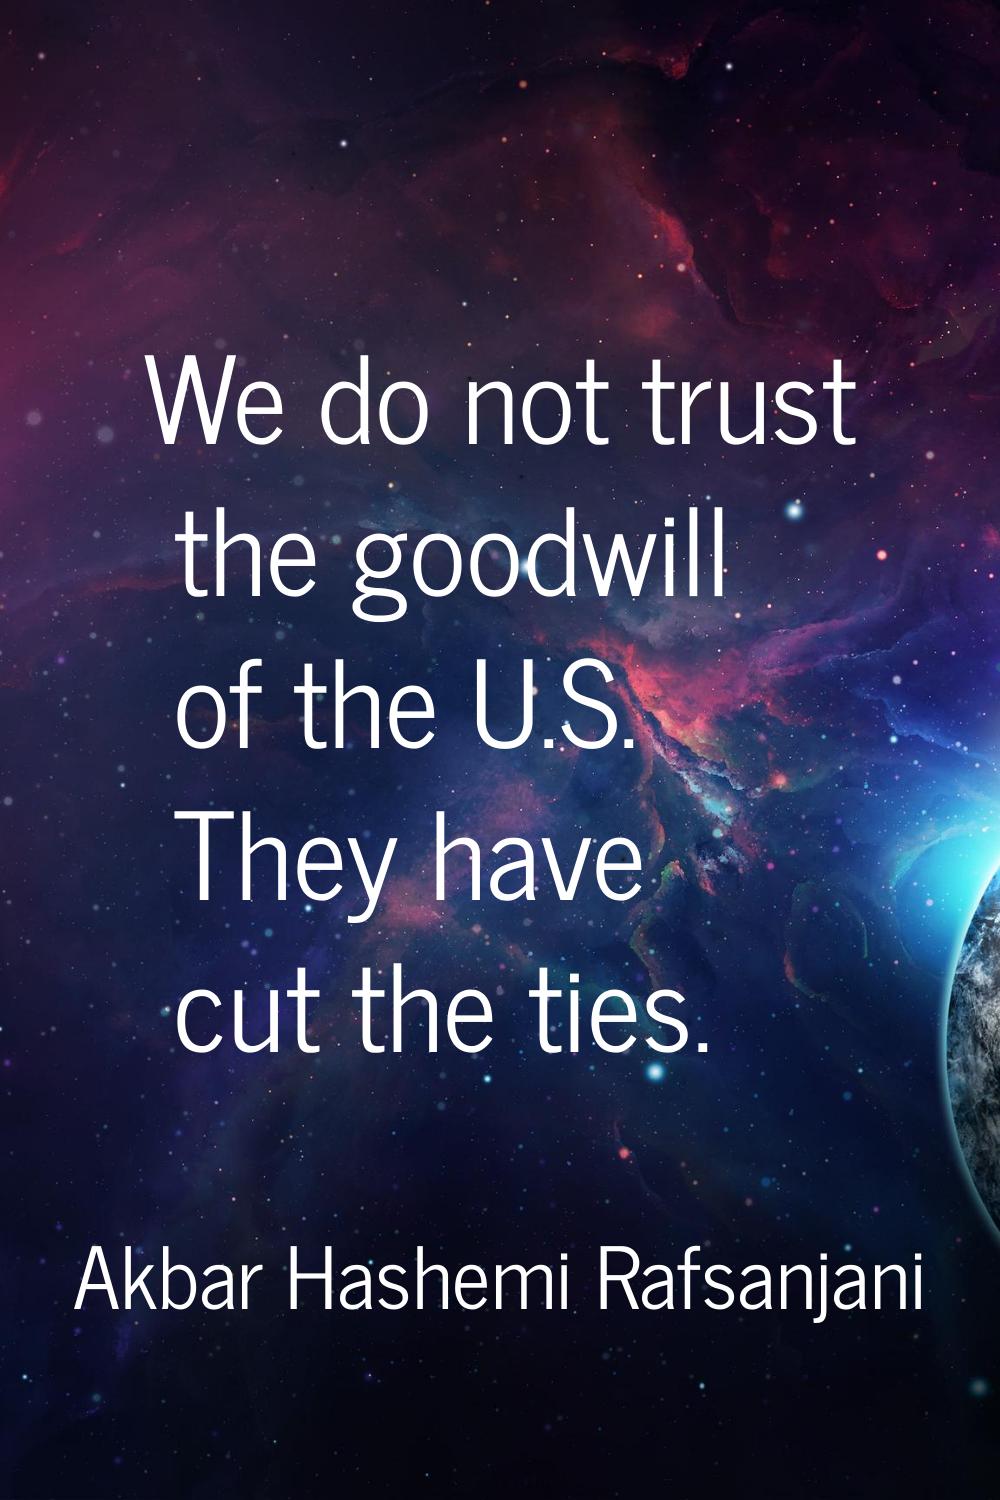 We do not trust the goodwill of the U.S. They have cut the ties.